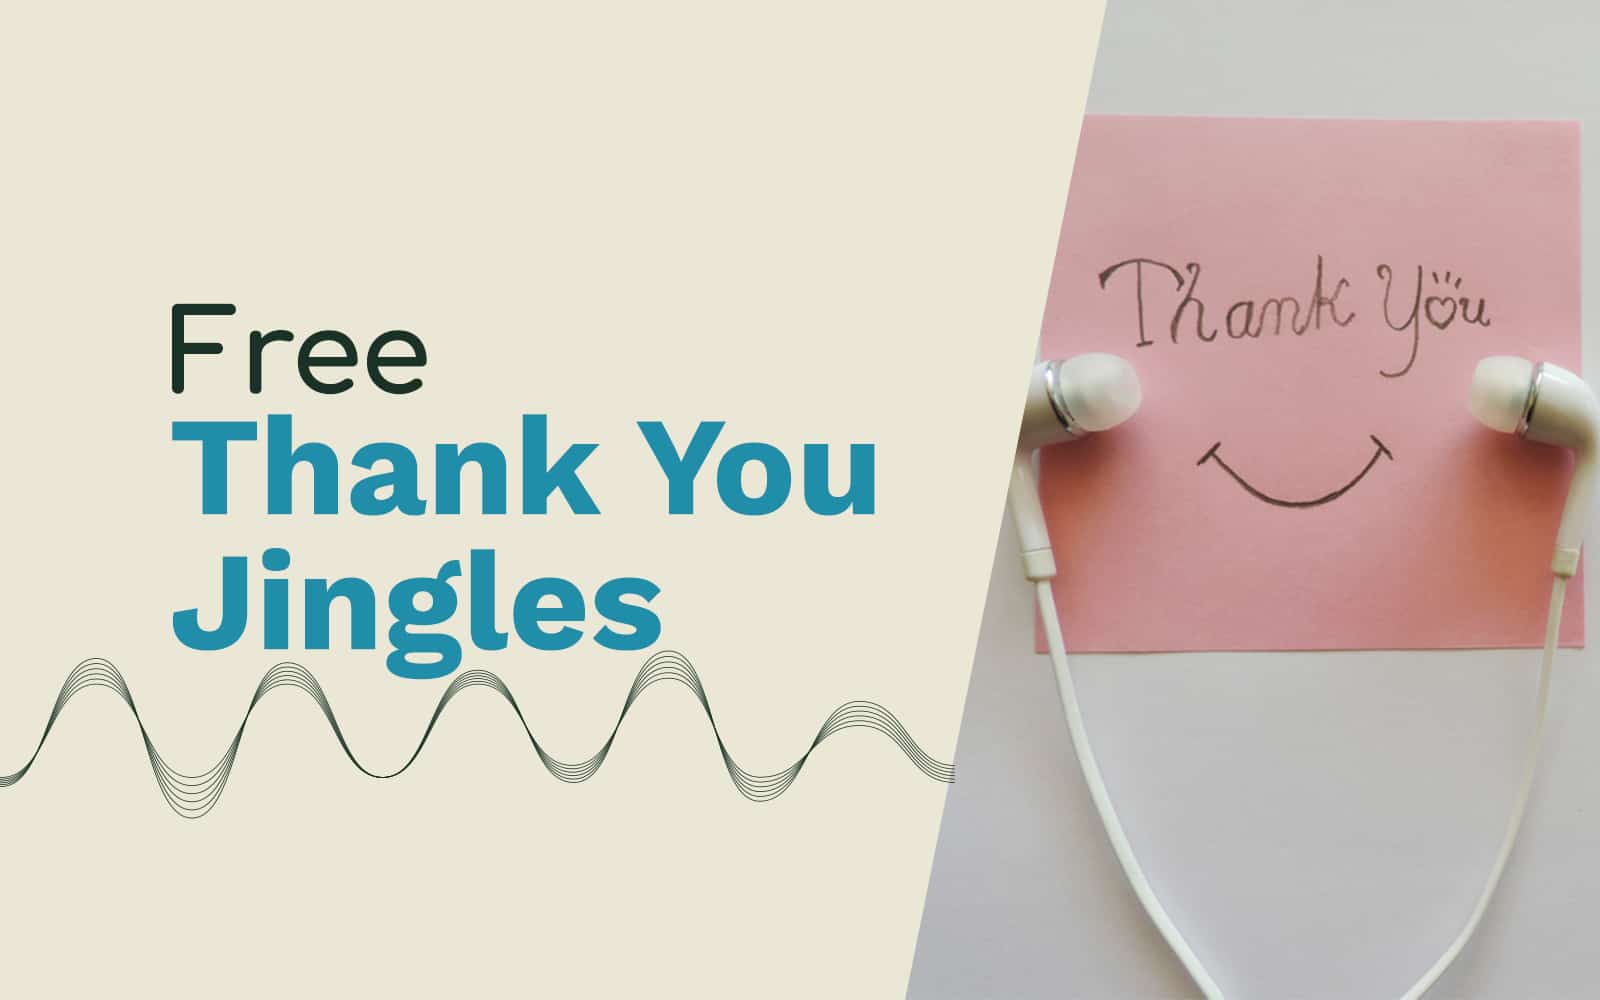 Week 9 Summer of Sound – Free “Thank You for Listening” Jingles Free Jingles thank you jingles Music Radio Creative